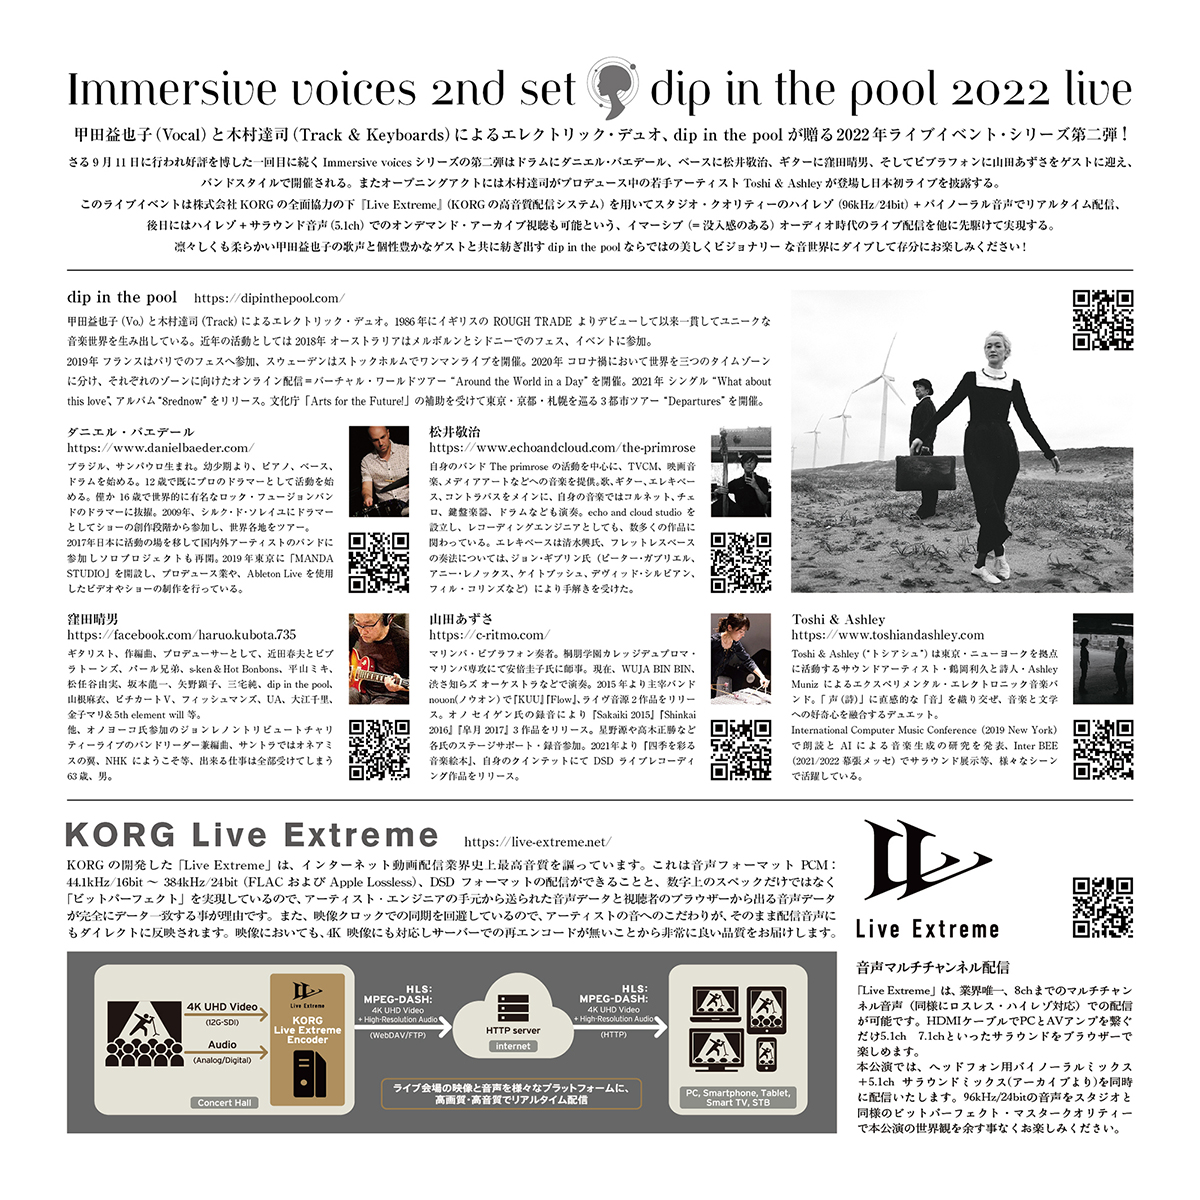 dip in the pool “Immersive voices”